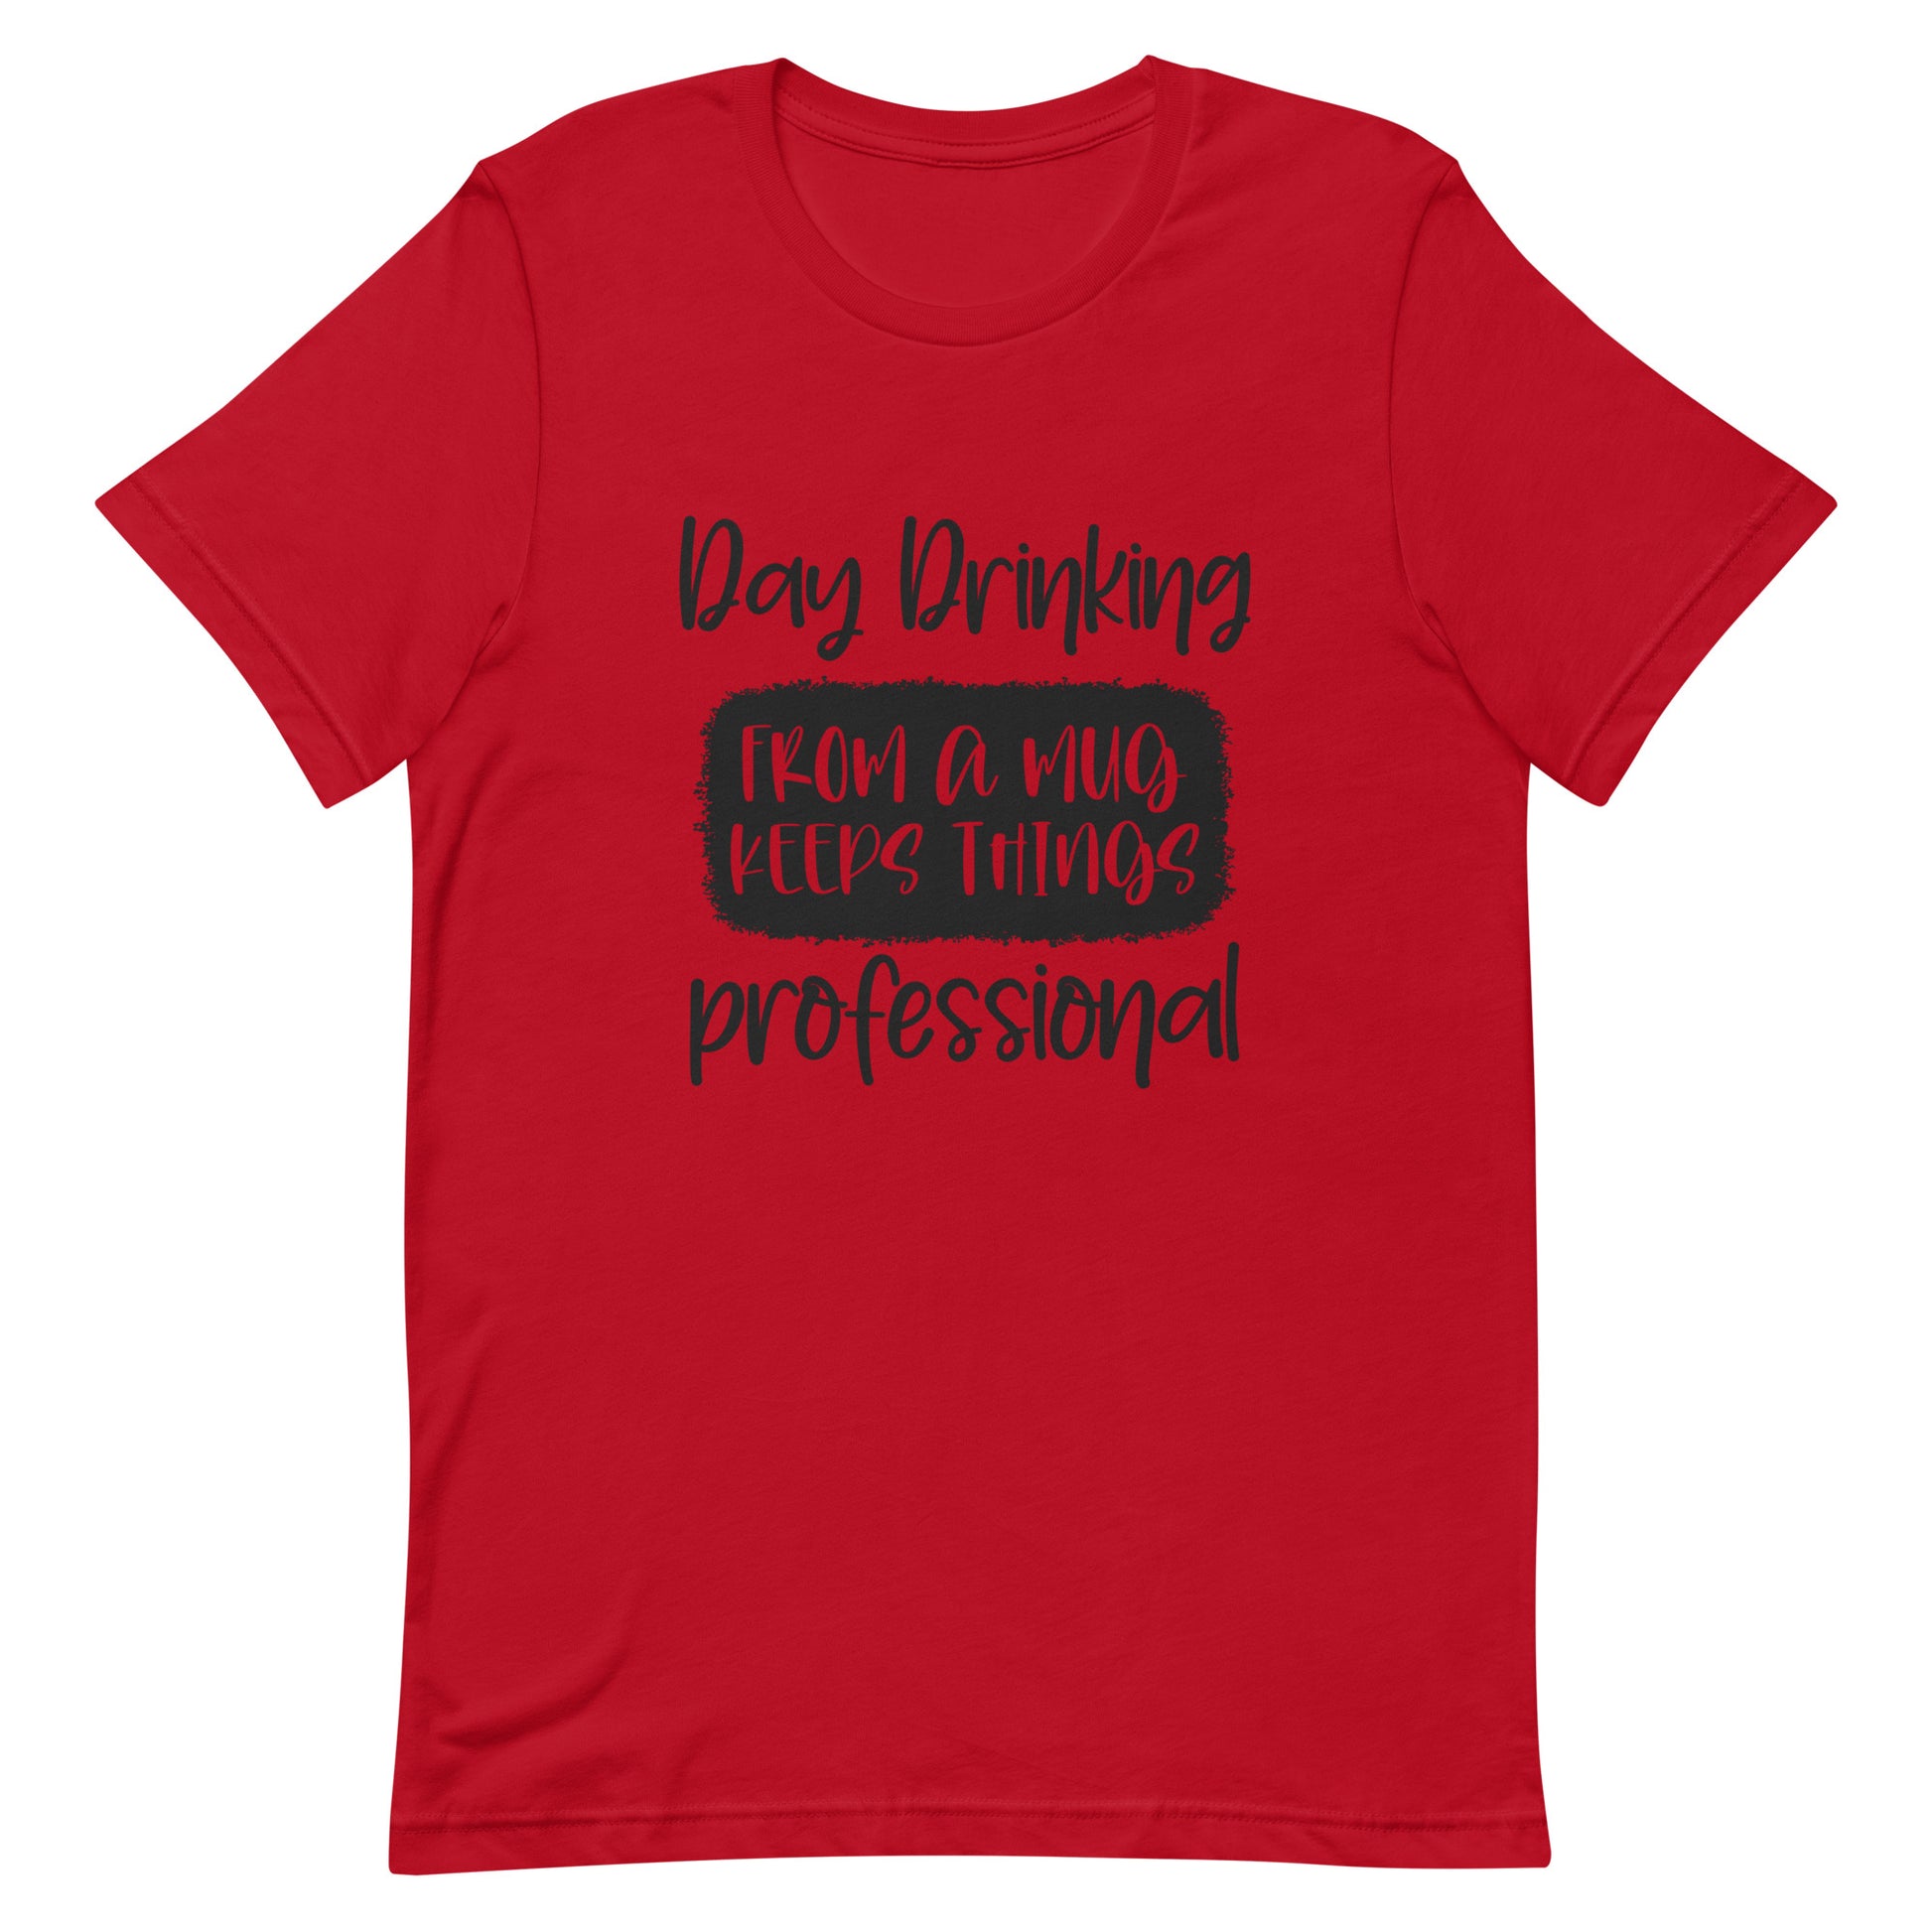 Day Drinking From a Mug Keeps Things Professional Unisex T-shirt